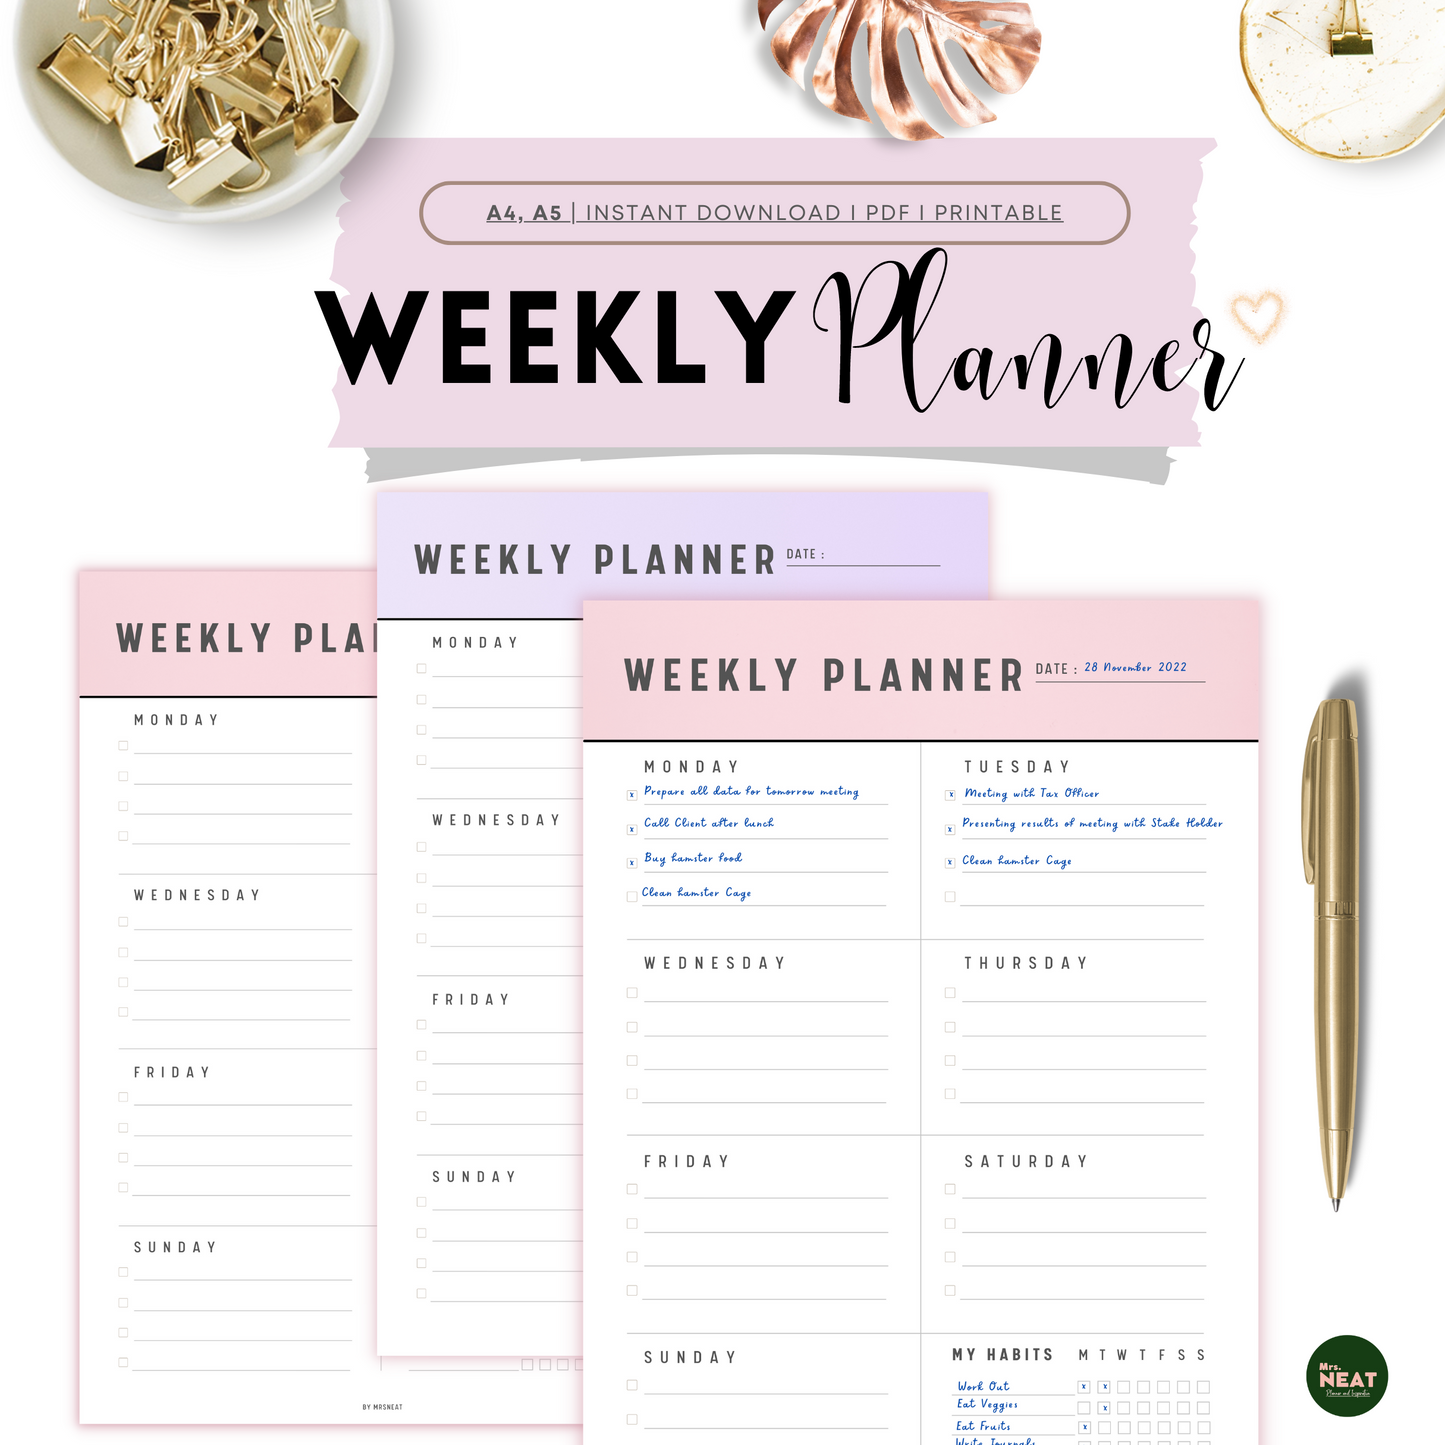 3 pages weekly planner in beautiful purple and pink color and gold pen